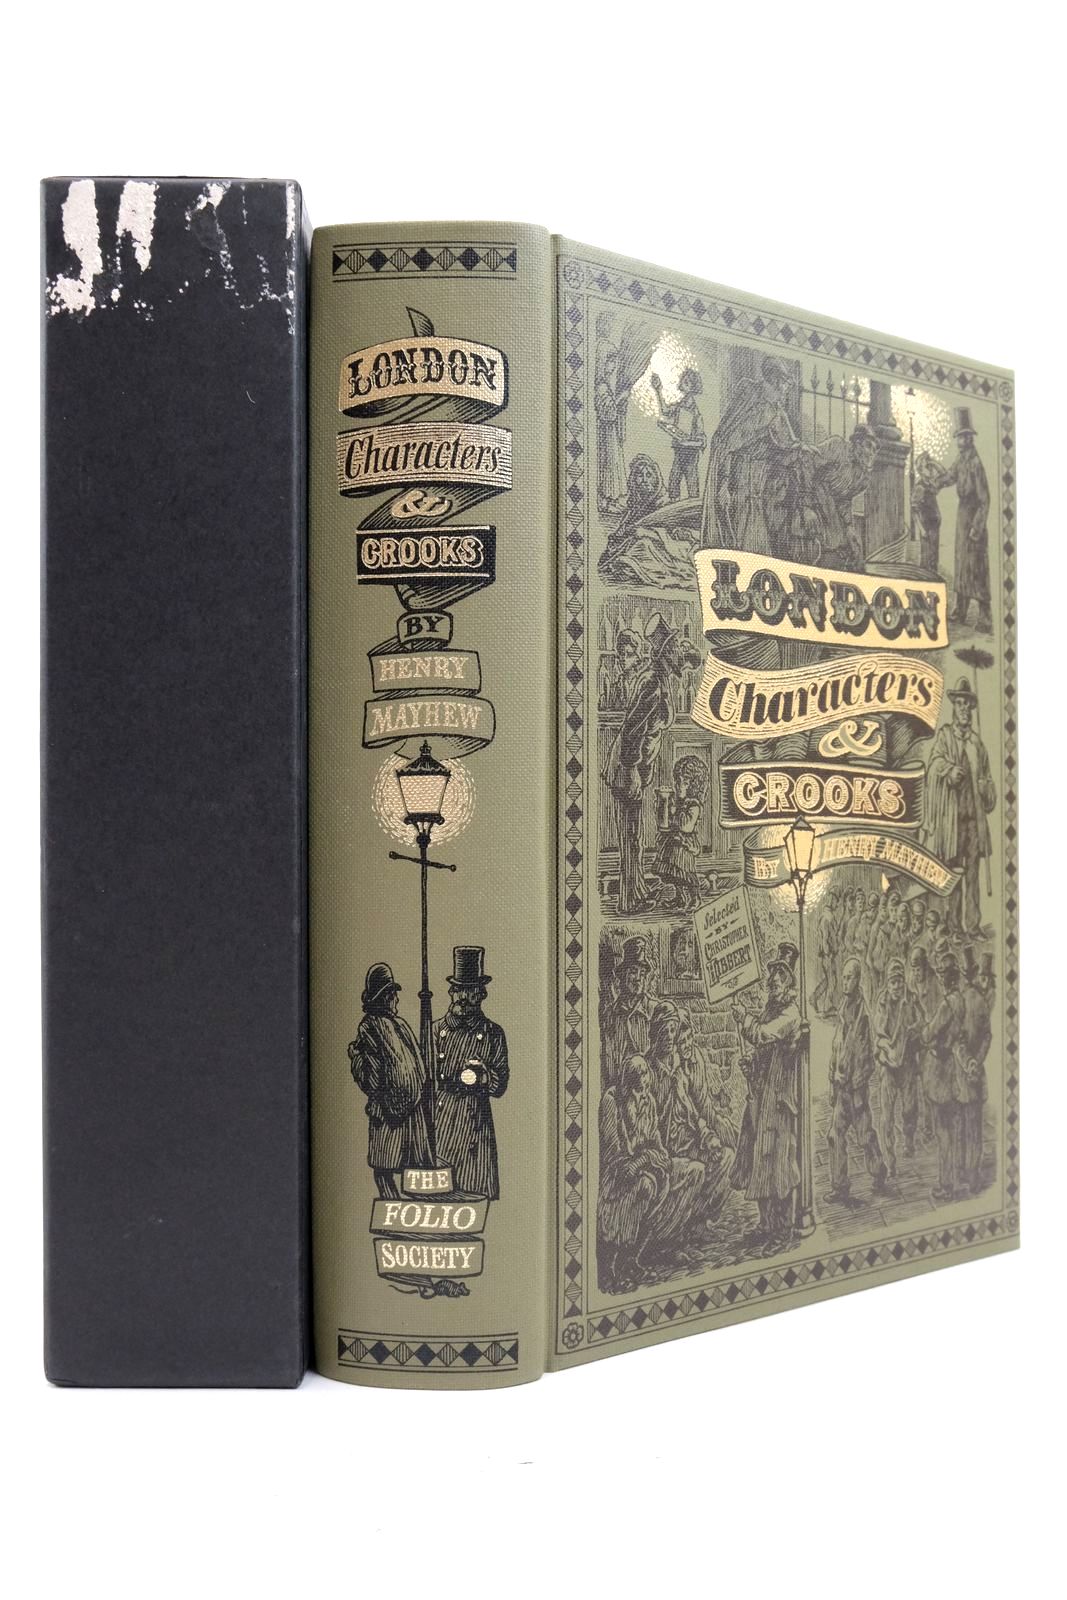 Photo of LONDON CHARACTERS AND CROOKS written by Mayhew, Henry Hibbert, Christopher published by Folio Society (STOCK CODE: 2138148)  for sale by Stella & Rose's Books